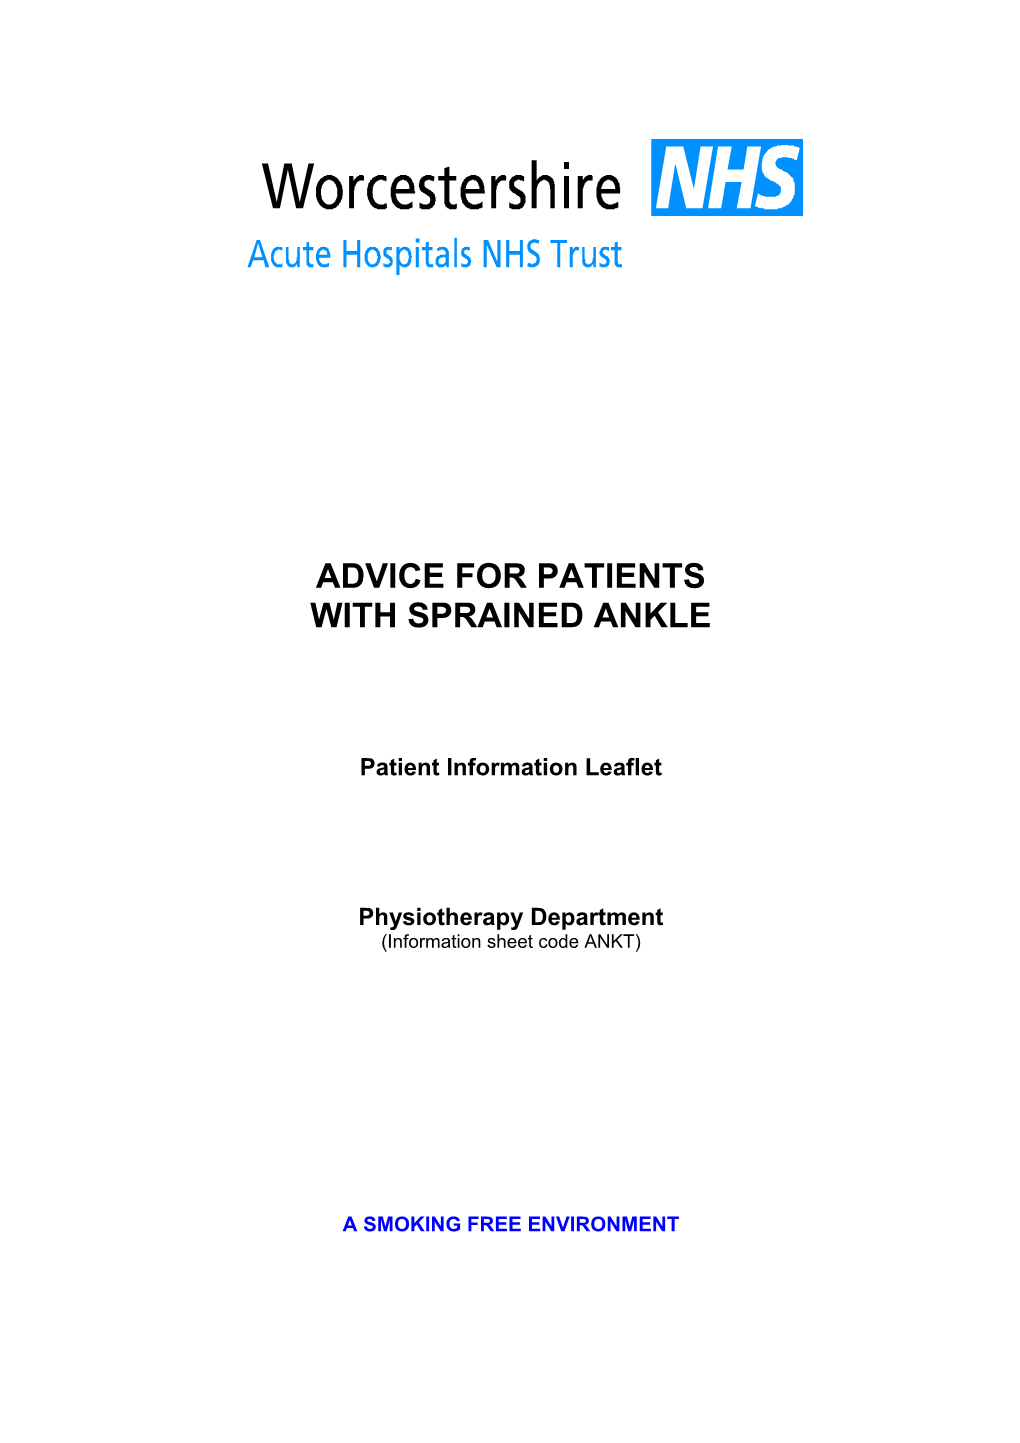 Advice for Patients